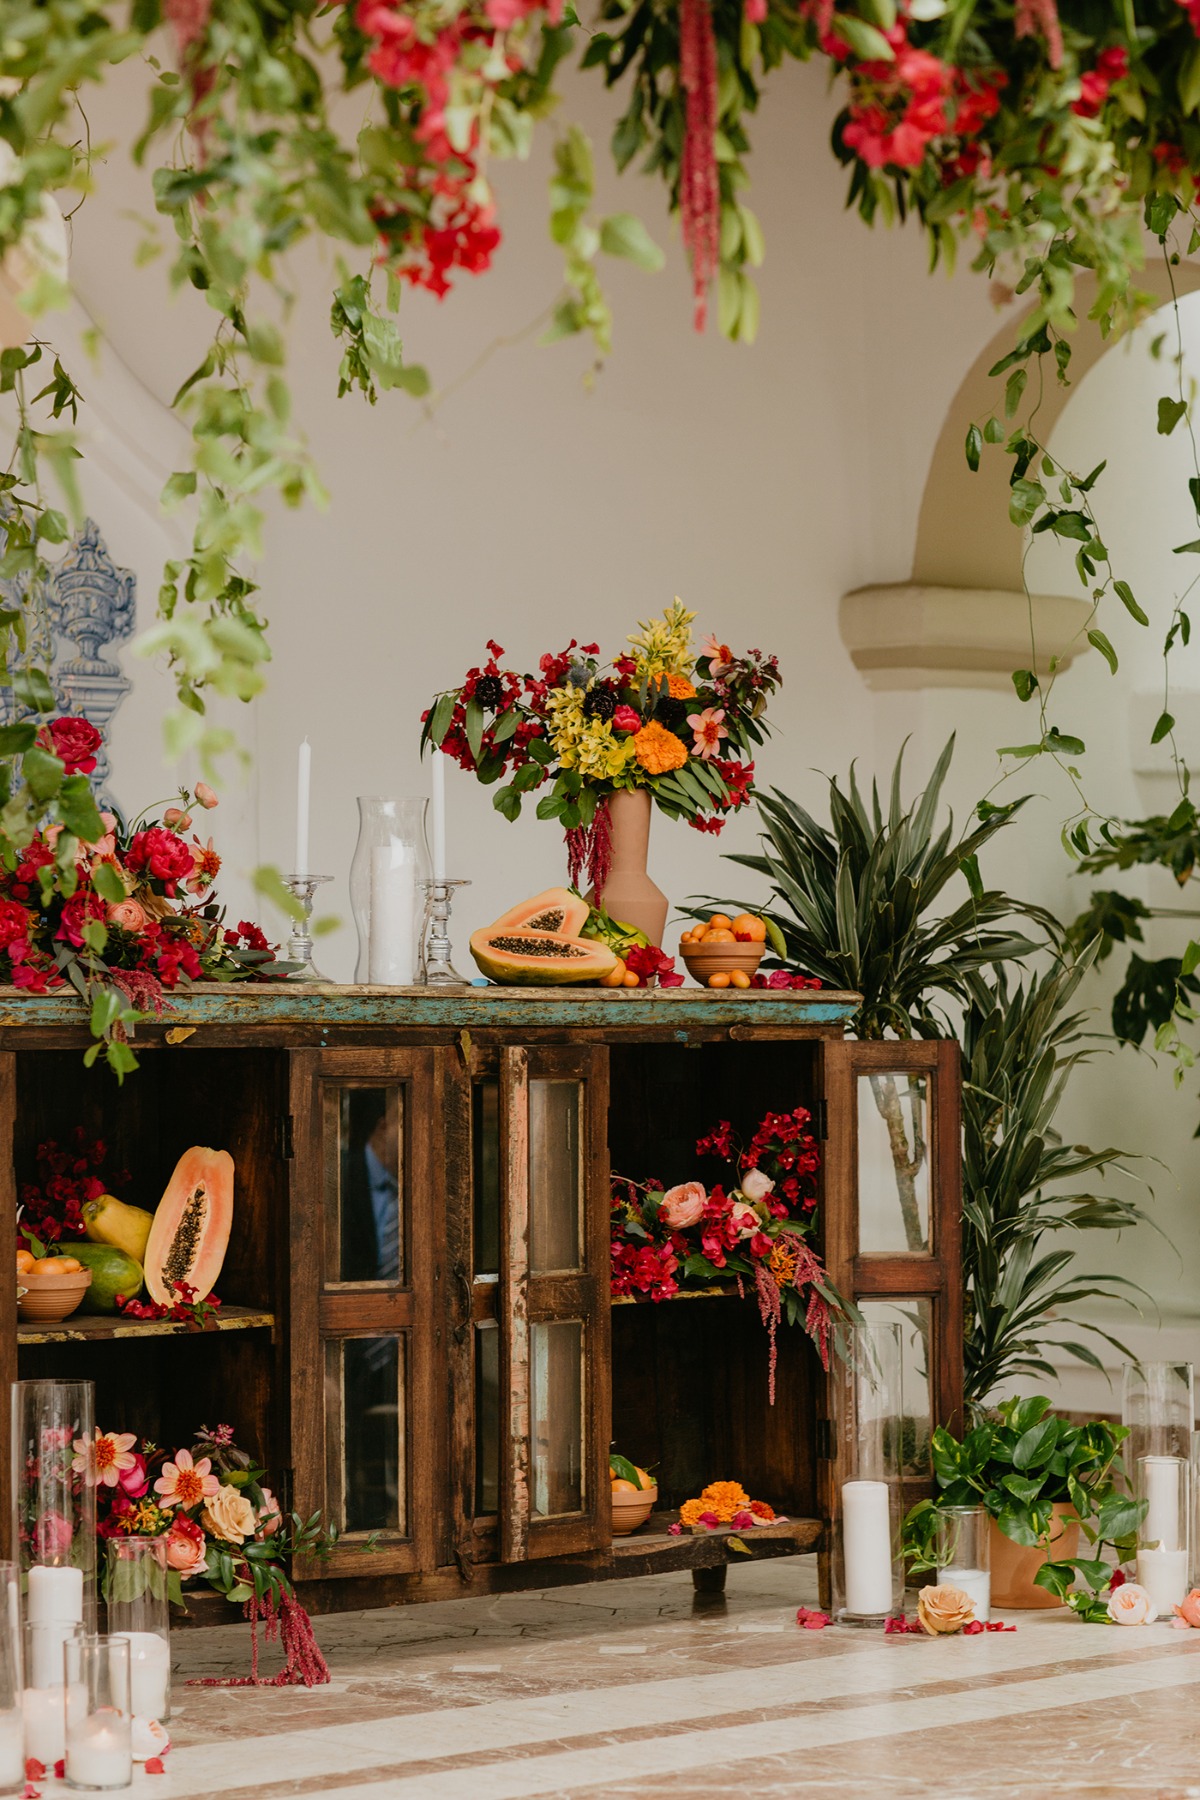 Bright And Colorful Wedding With A Delicious Nod To The Couple's Hispanic Heritage